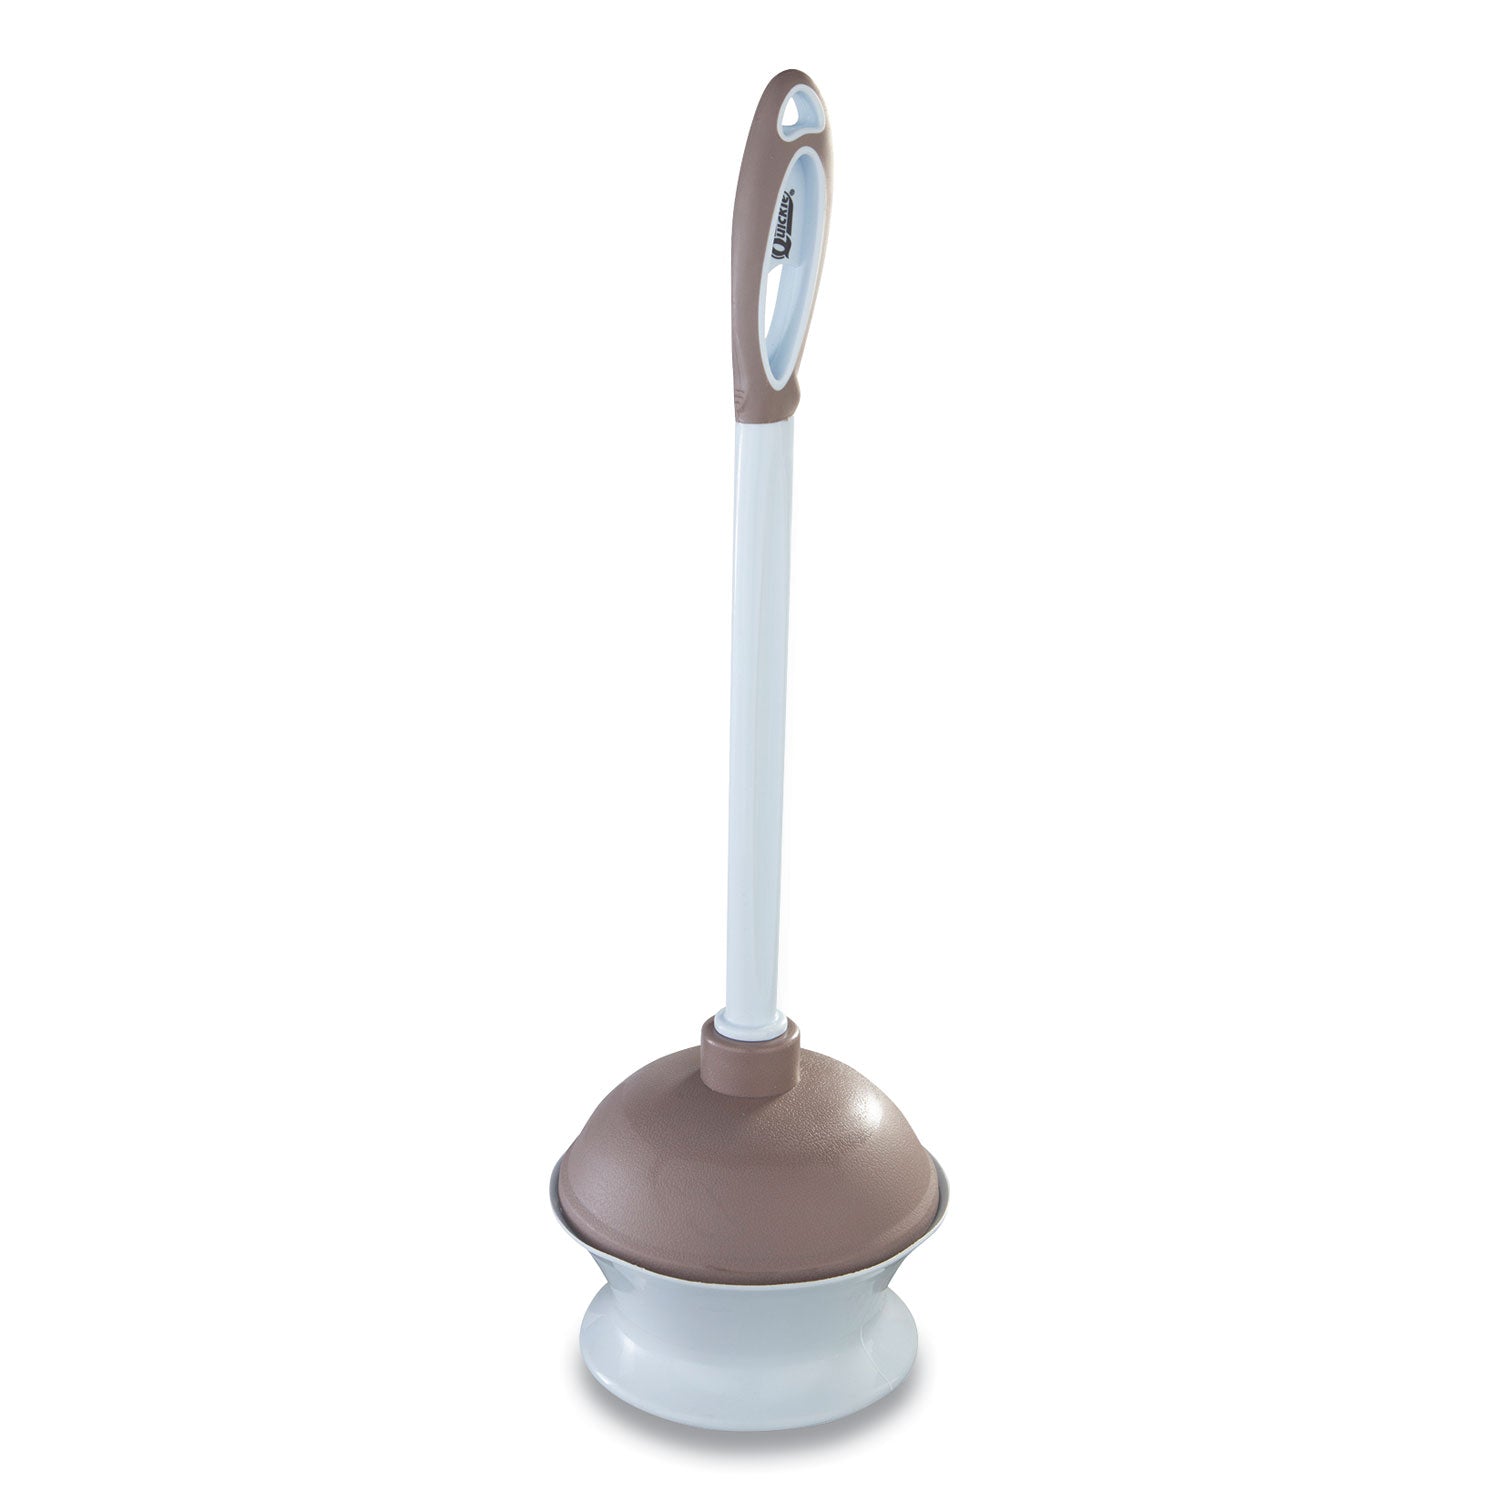 plastic-toilet-plunger-and-caddy-with-microban-16-plastic-handle-65-dia-white-taupe_qck360mb - 1